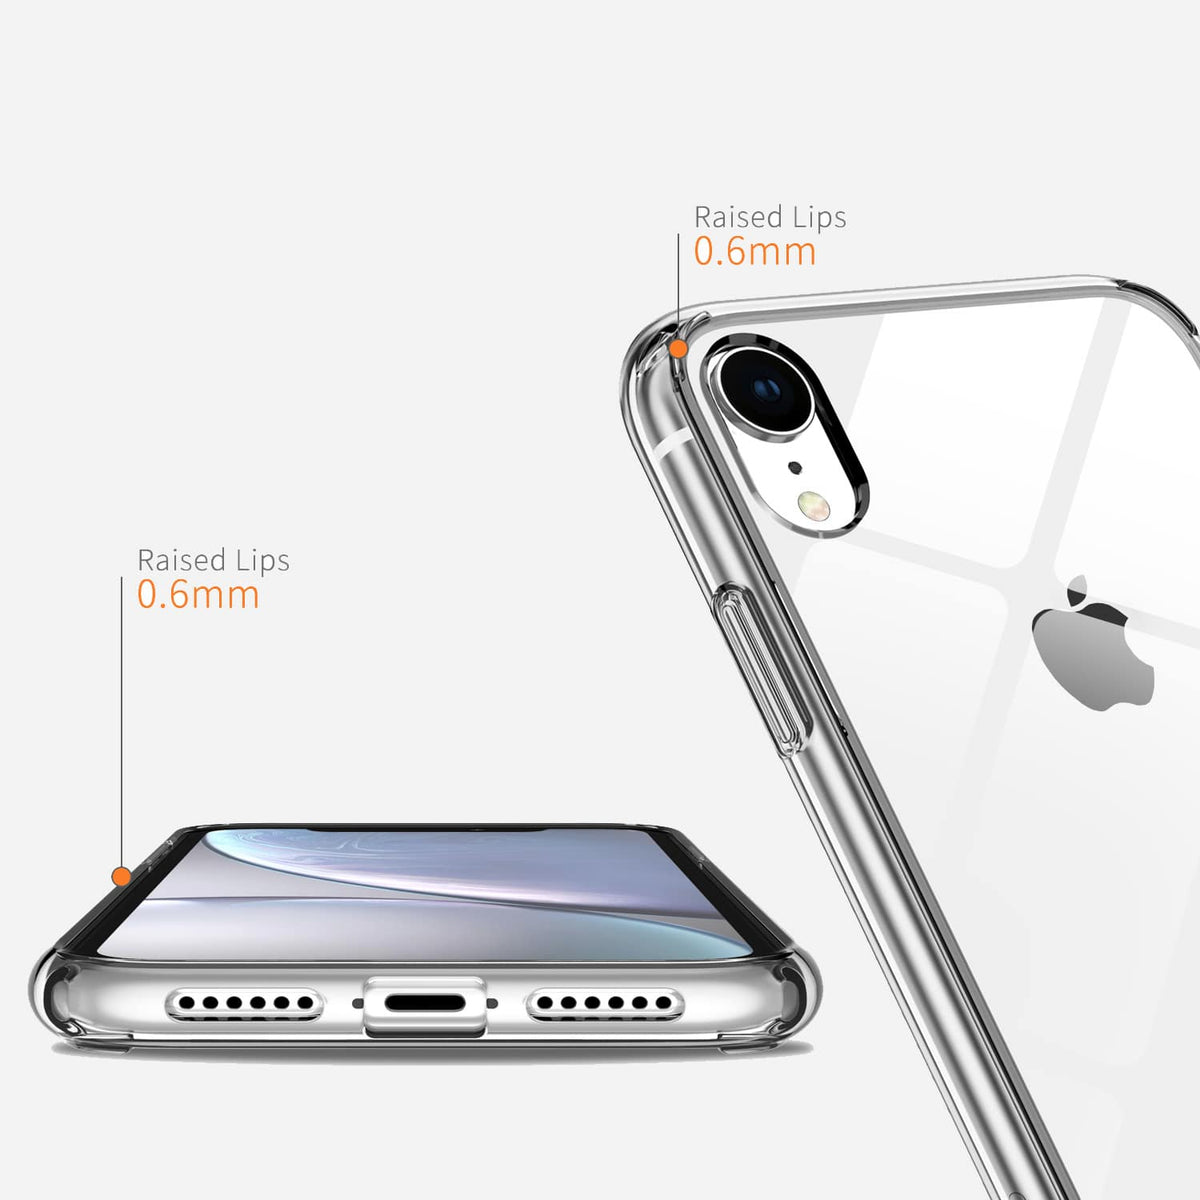 Clear Case for iPhone X/XS